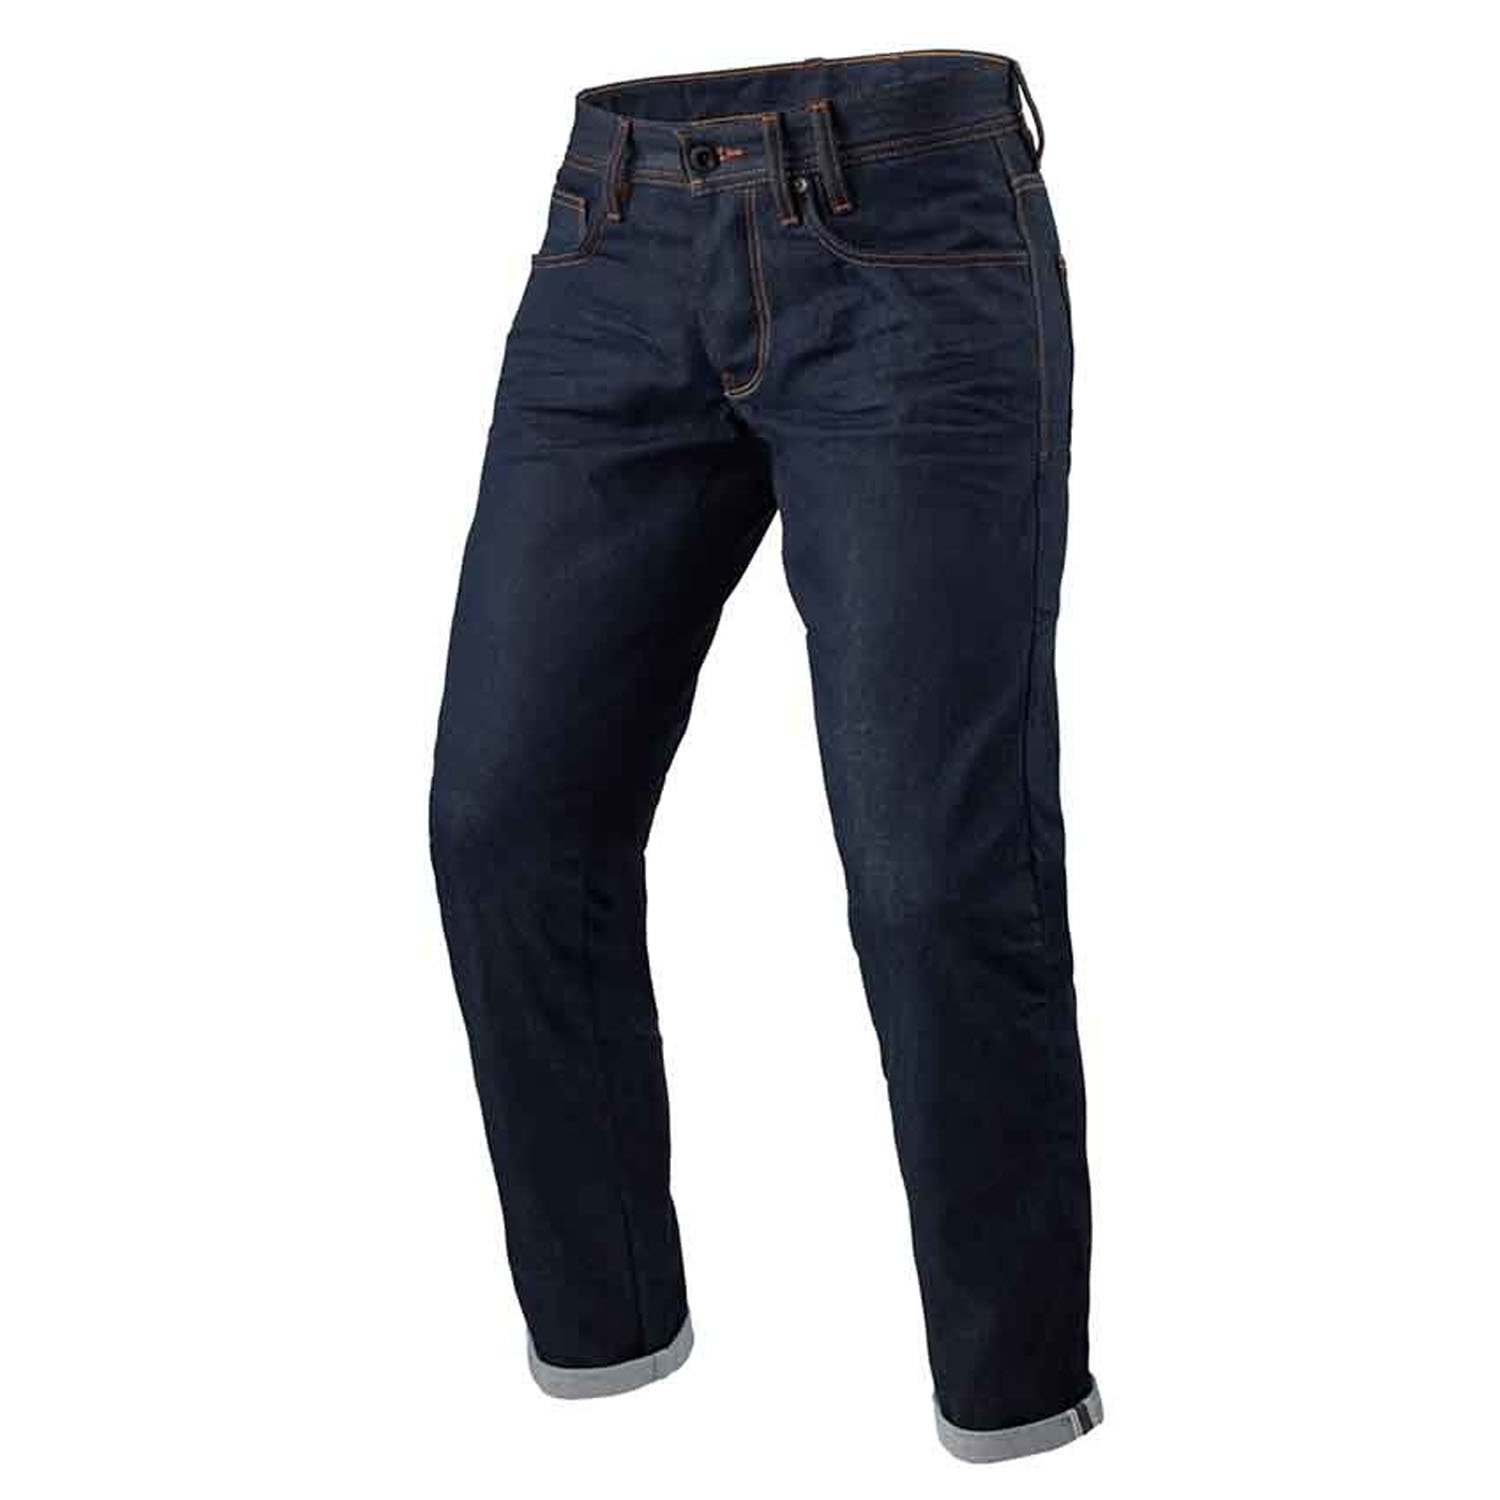 Image of REV'IT! Jeans Lewis Selvedge TF Dark Blue L36 Motorcycle Pants Size L36/W30 ID 8700001358095